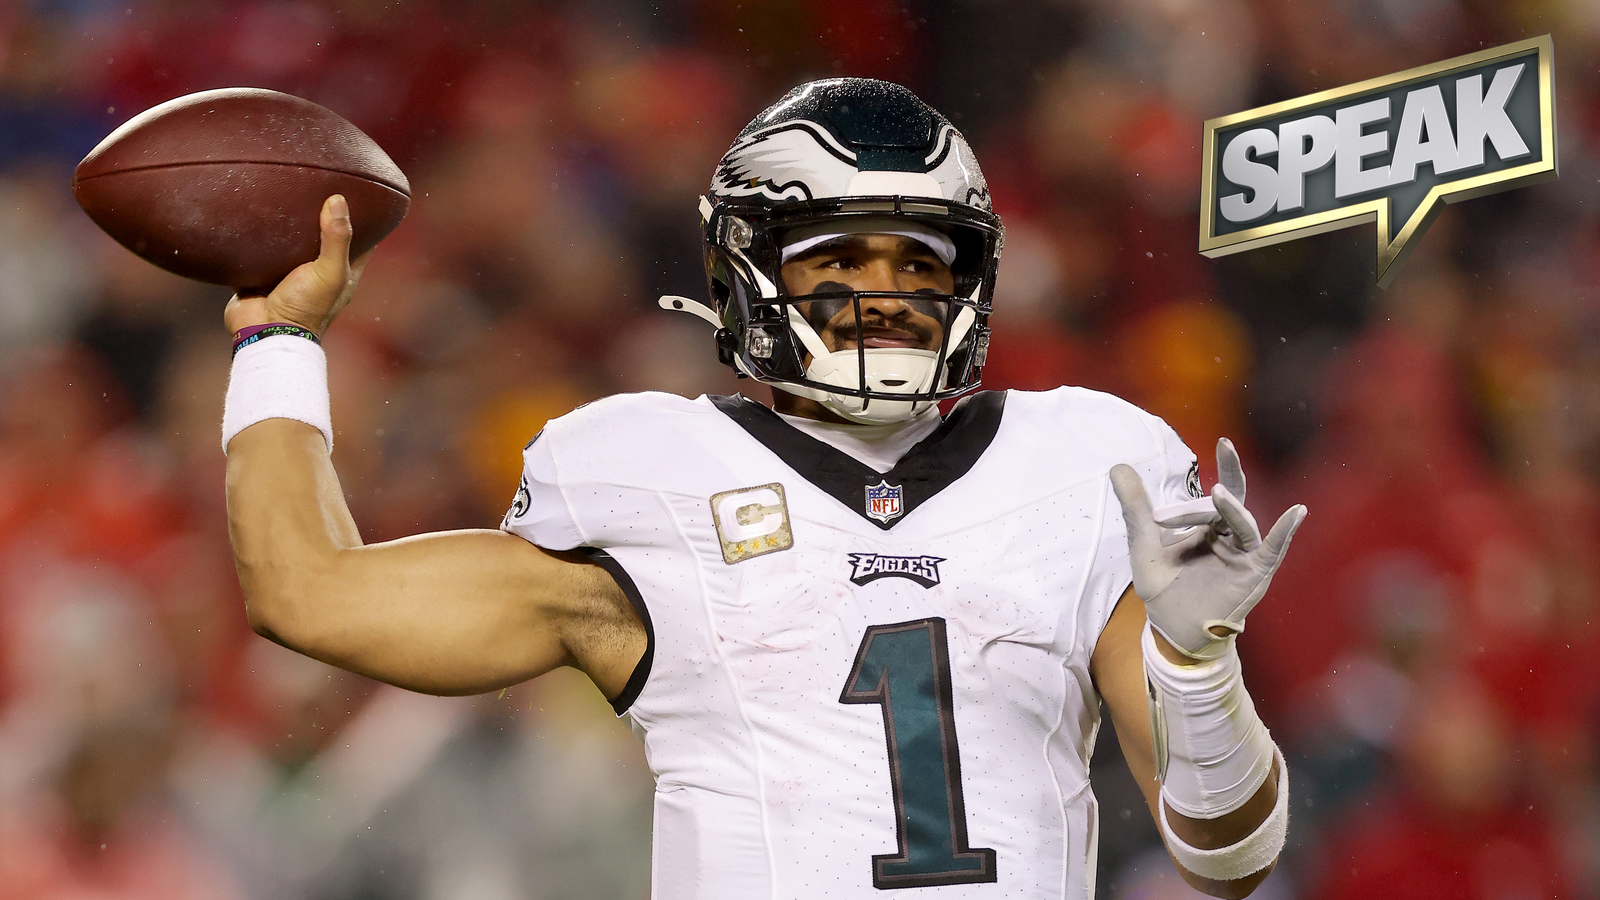 Eagles beat Chiefs — did the better team win on Monday night?